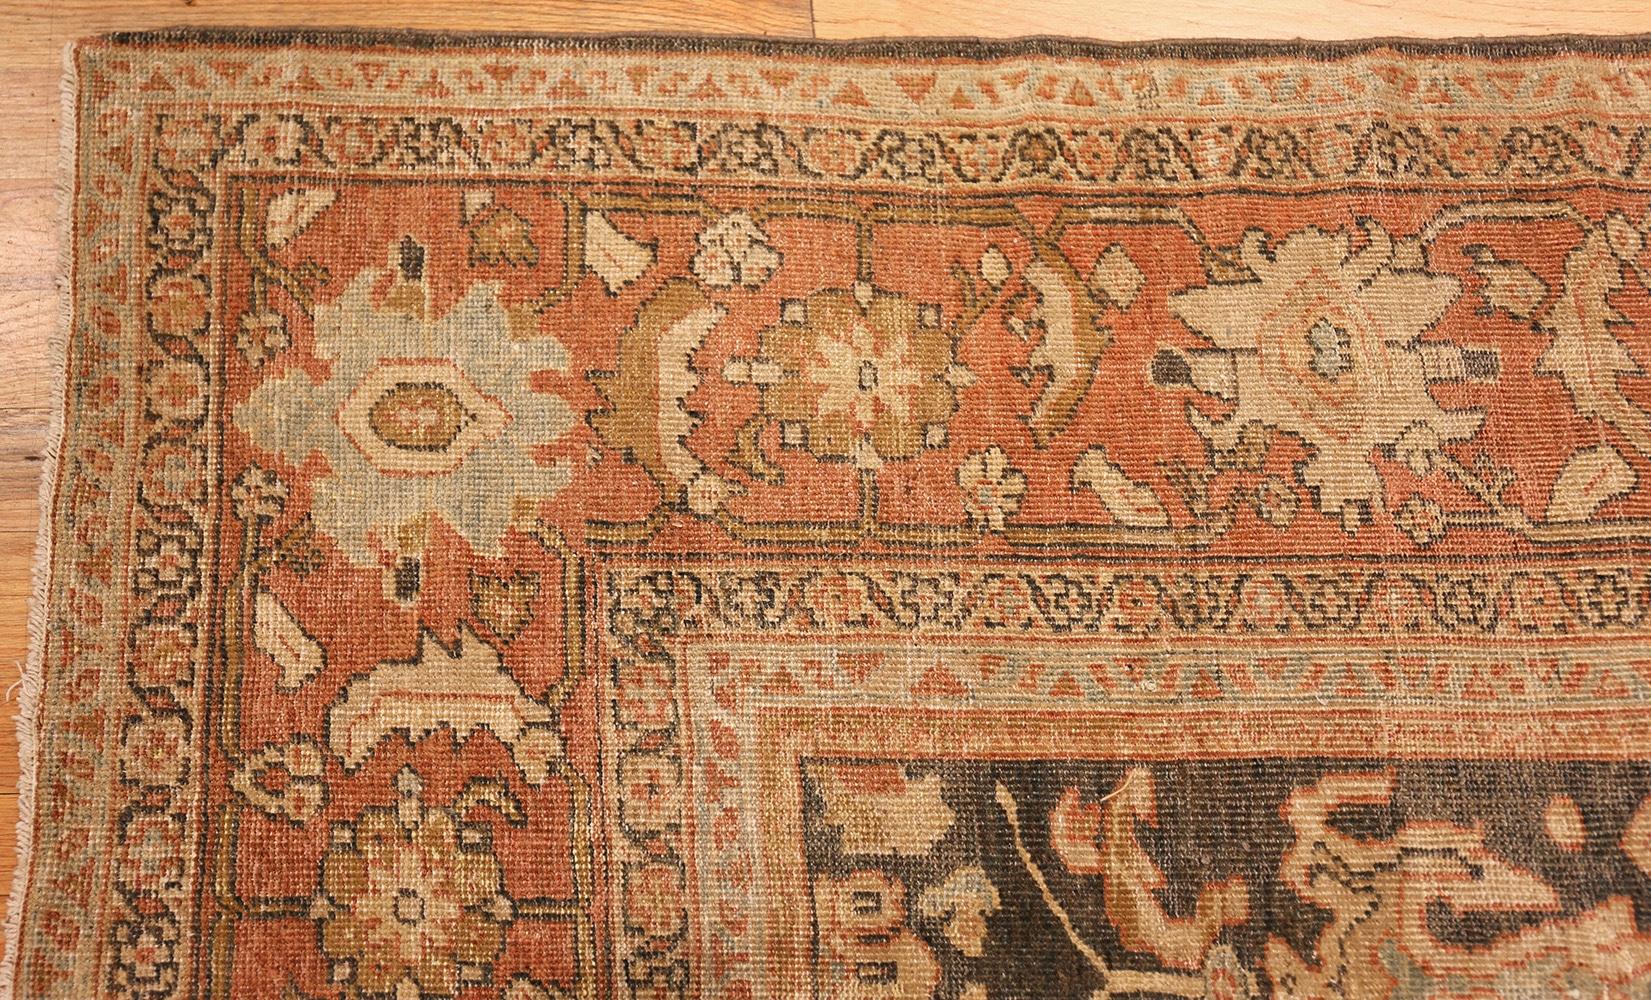 Magnifique grand tapis persan Sultanabad gris ancien, Pays du tapis / Type de tapis : Tapis persan, Circa date : 1920. Taille : 10 ft x 17 ft 3 in (3,05 m x 5,26 m).